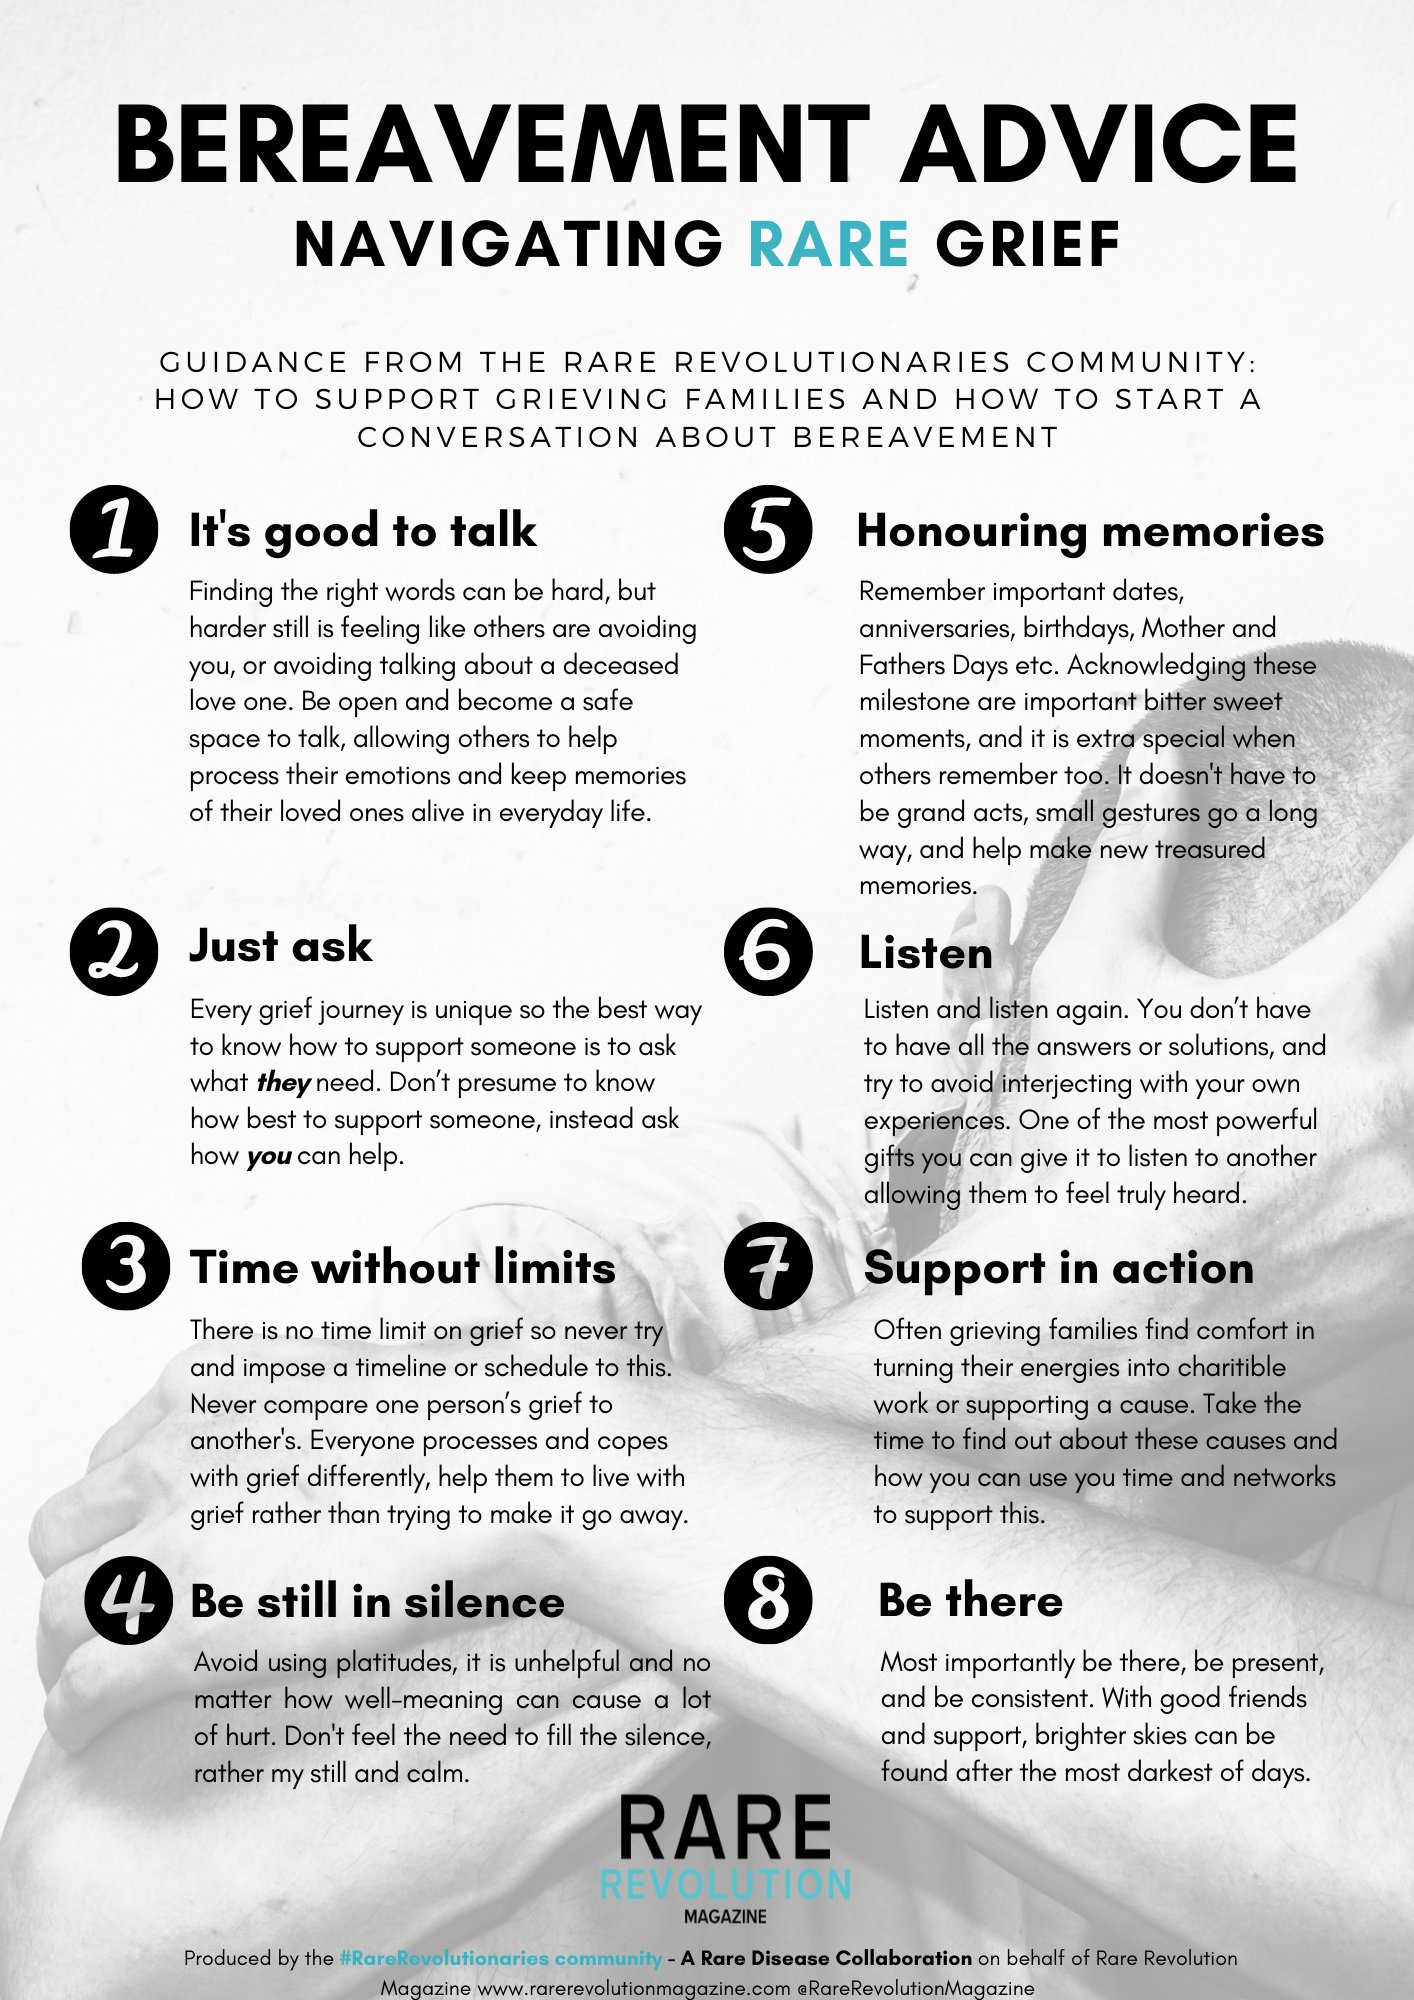 Rare Revolution Mag on Twitter: "This week is Grief Awareness Week. Read our bereavement advice for navigating RARE and share with anyone you think may benefit from it. https://t.co/icoEOPERGJ https://t.co/q7467p6yXw" /